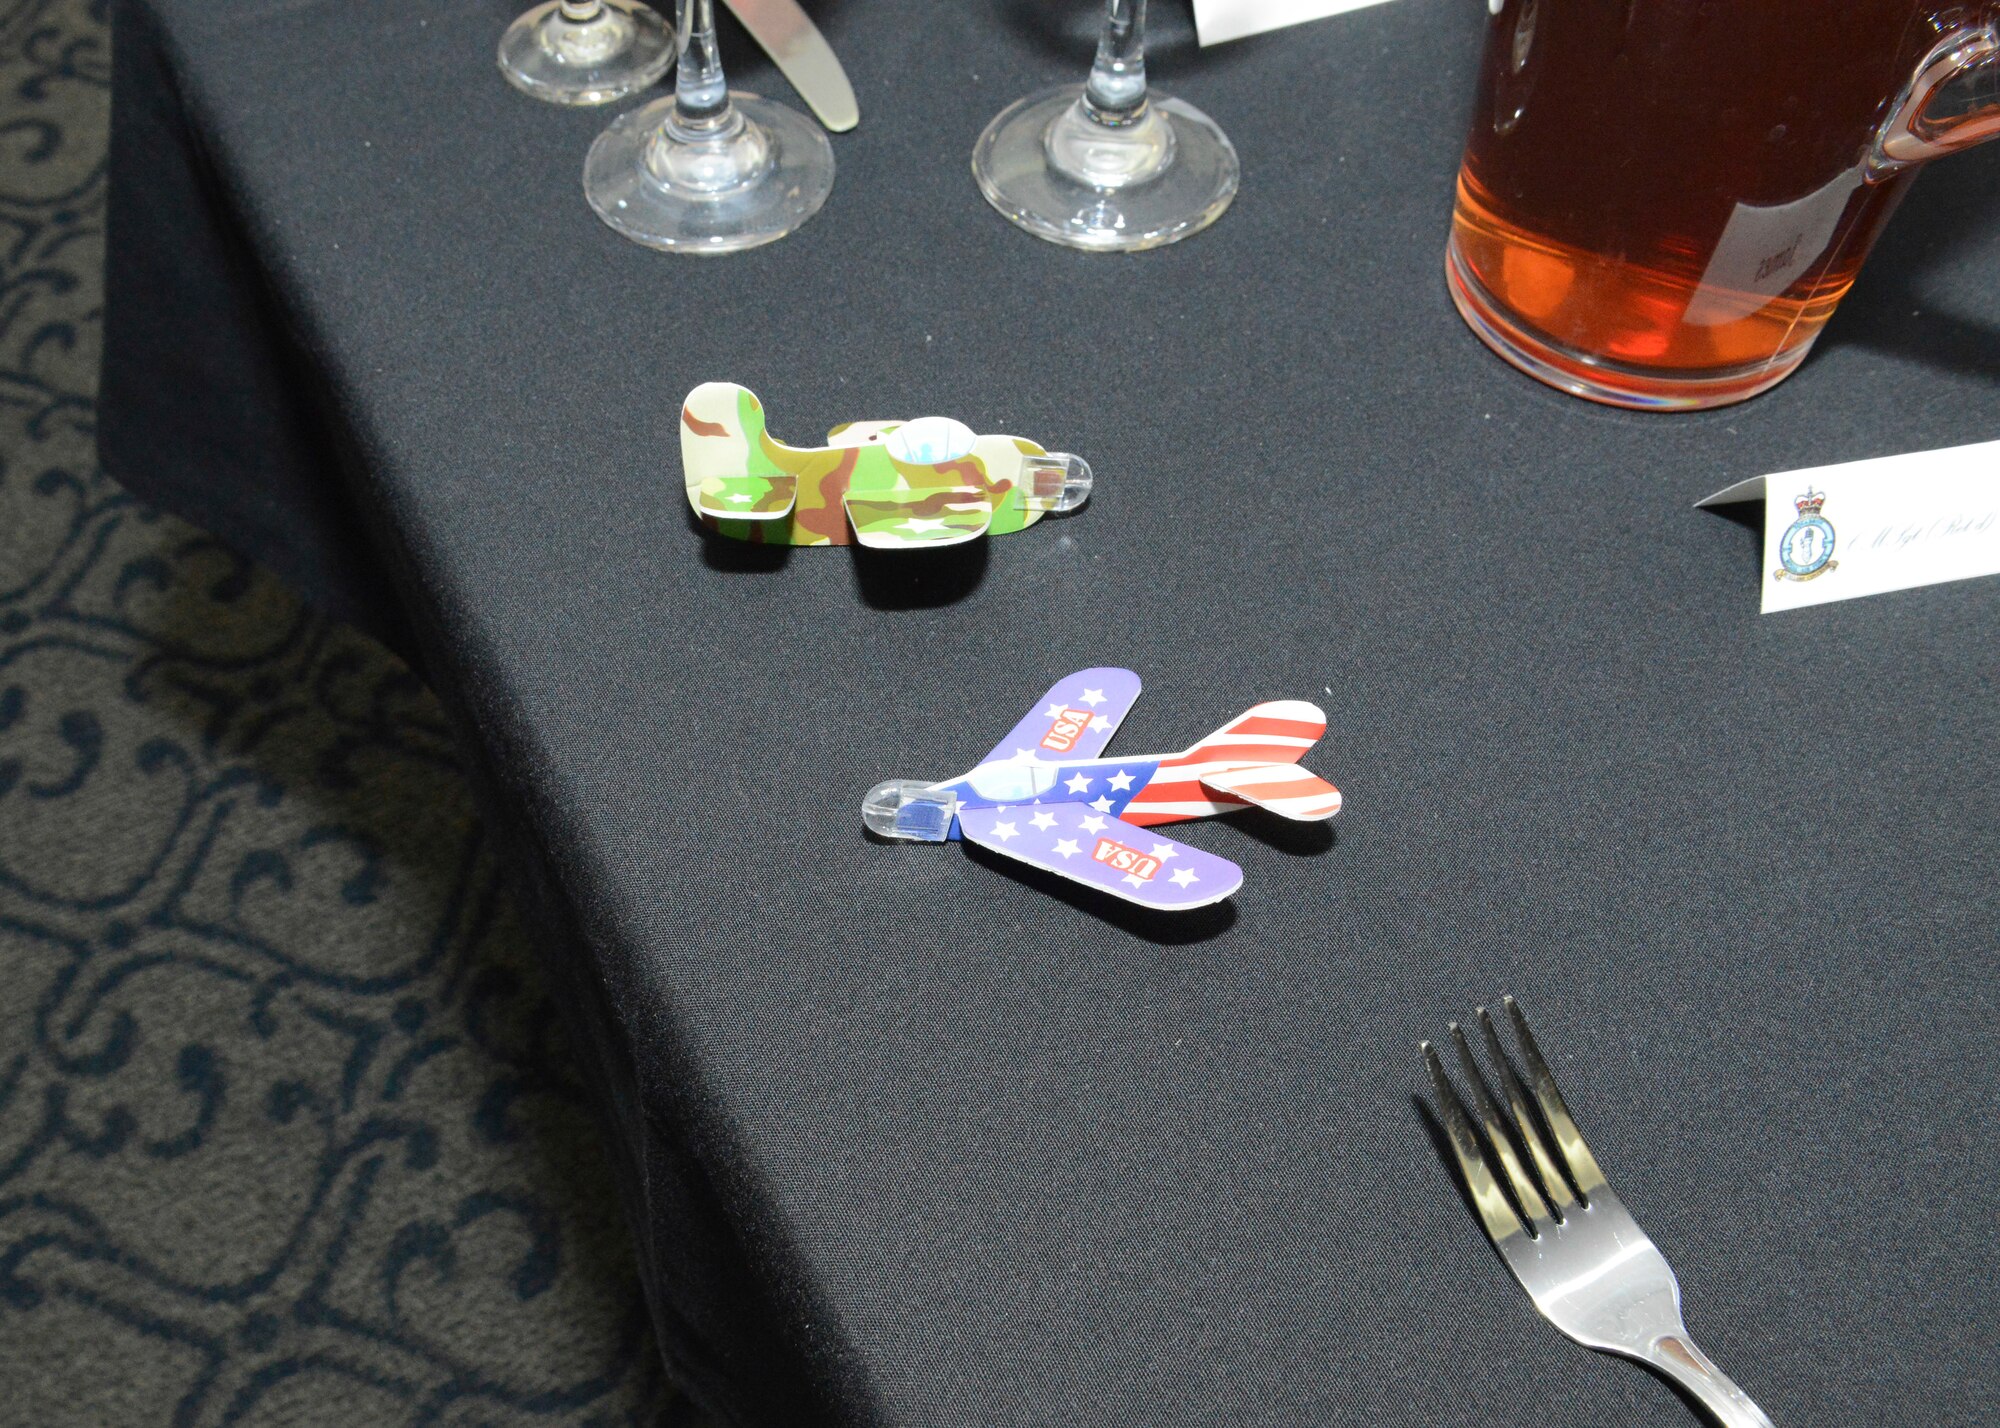 Little World War II-era airplanes were placed on each table at the Battle of Britain celebration held at Edwards AFB Nov. 9 at Club Muroc. (U.S. Air Force photo by Kenji Thuloweit)